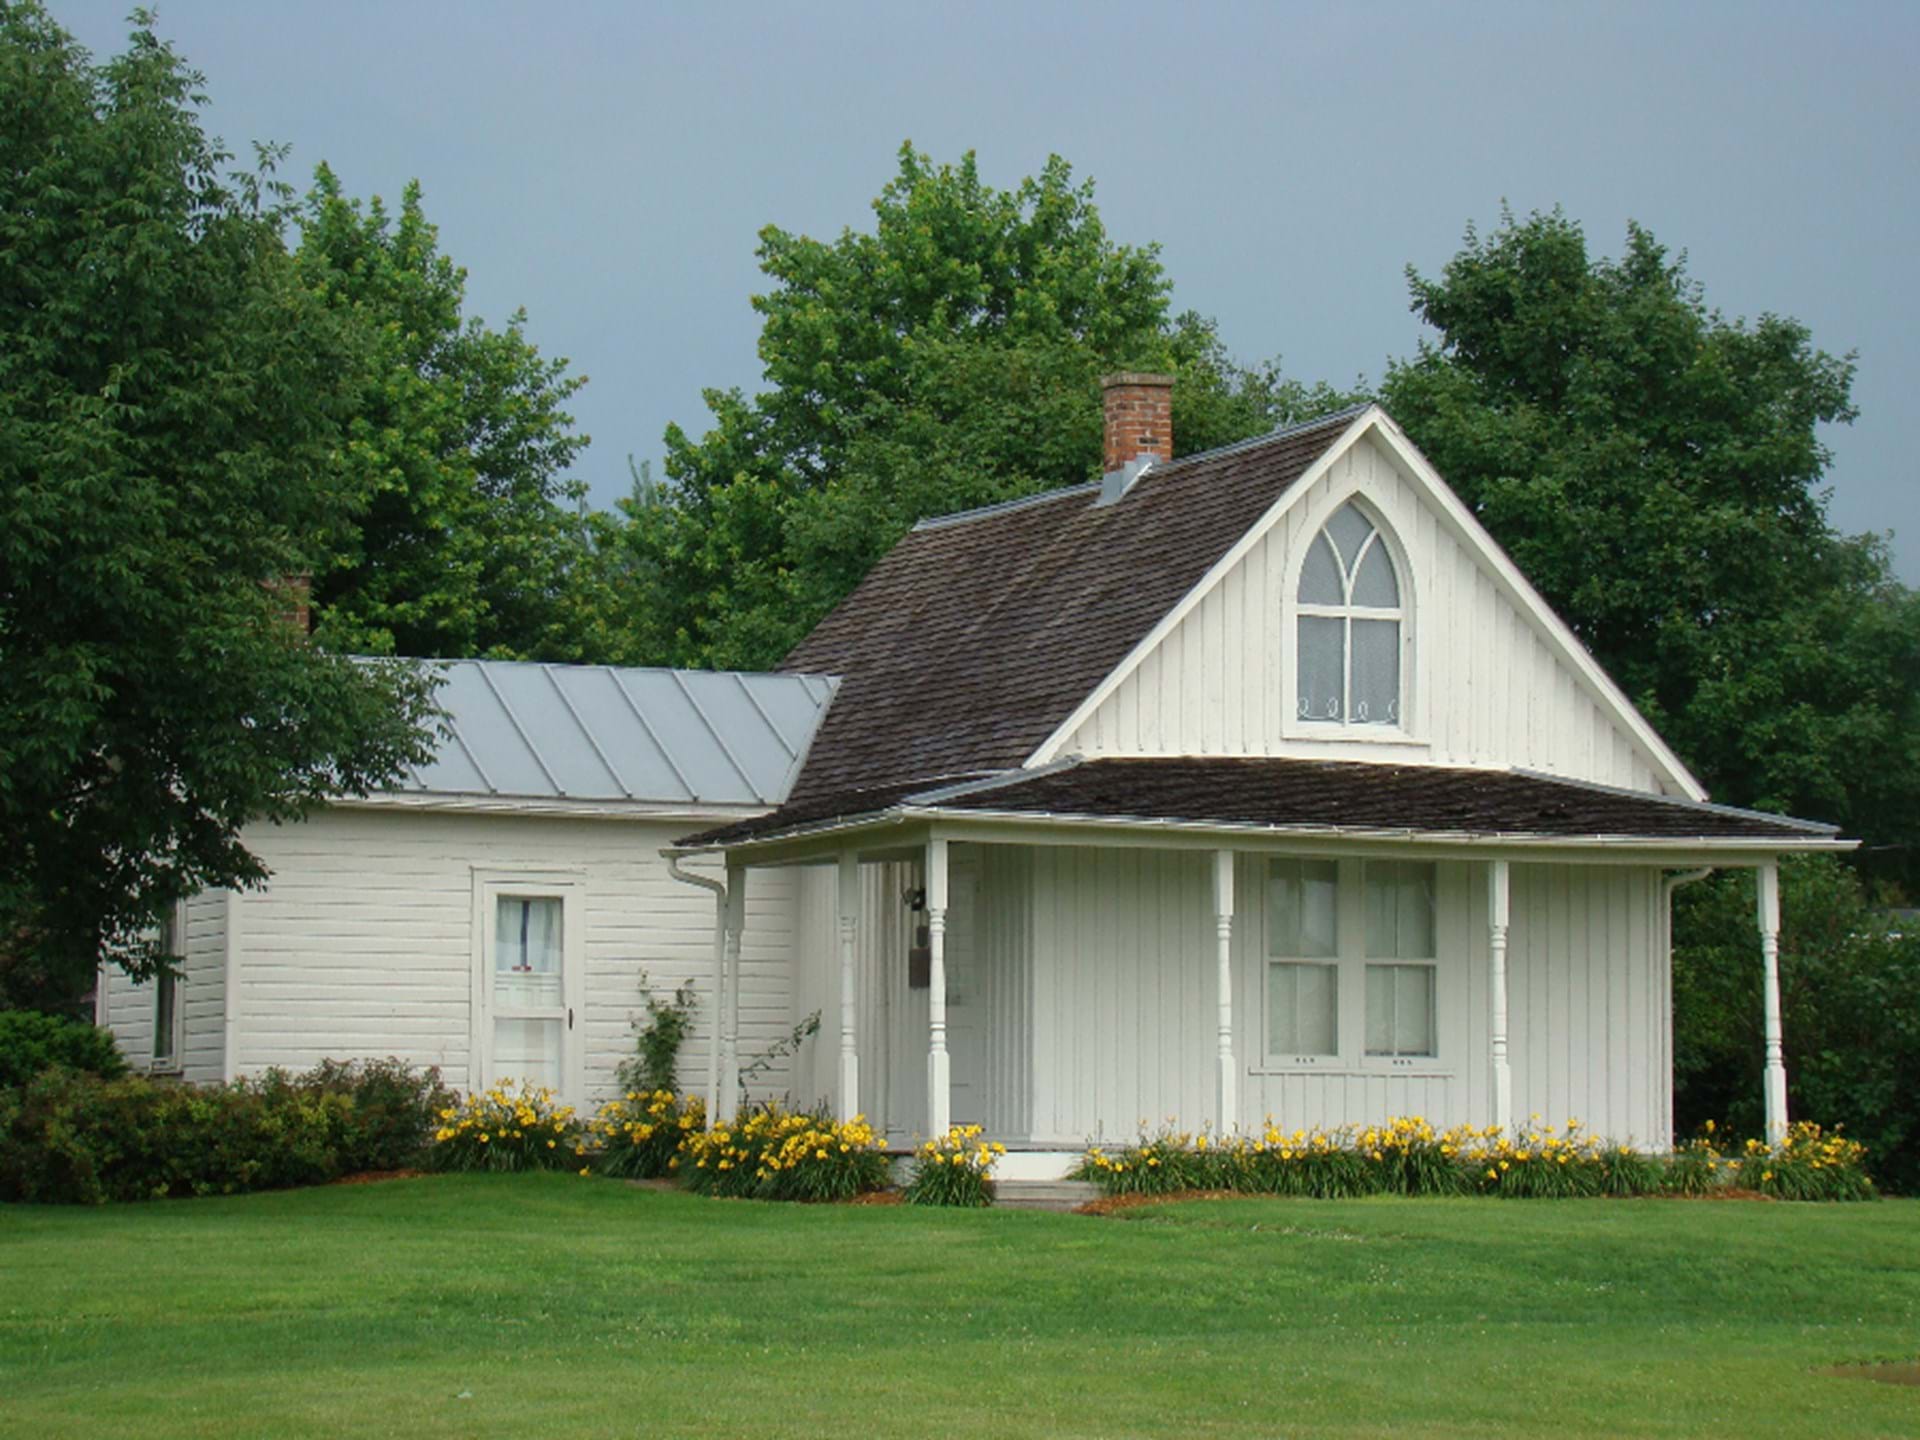 American Gothic House (open for tours the 2nd Sat. of the month, April-October)